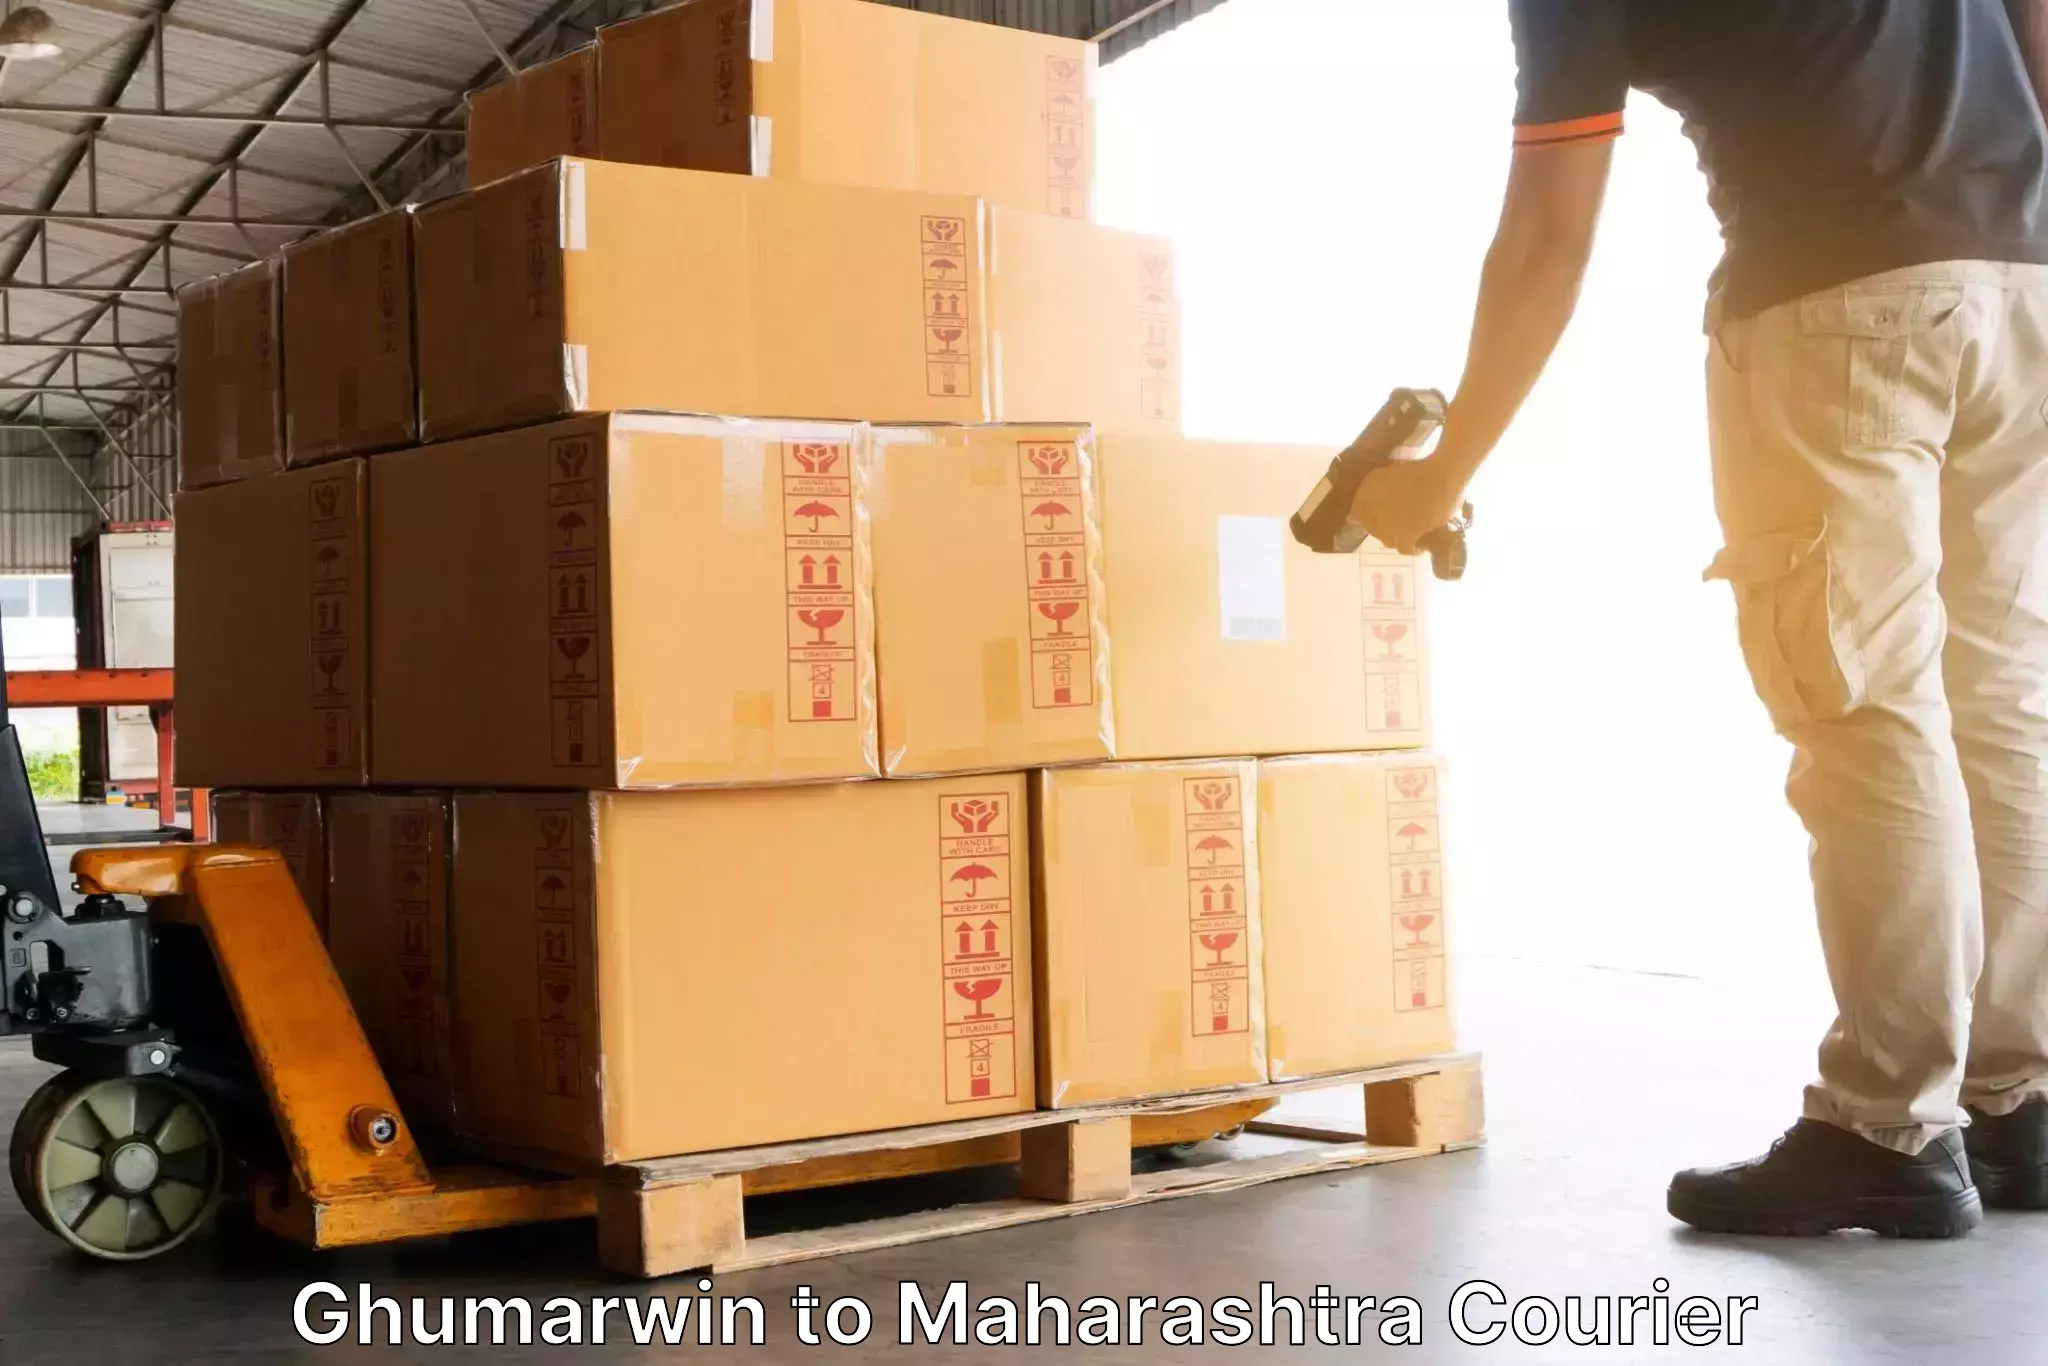 Express delivery capabilities Ghumarwin to Lonar